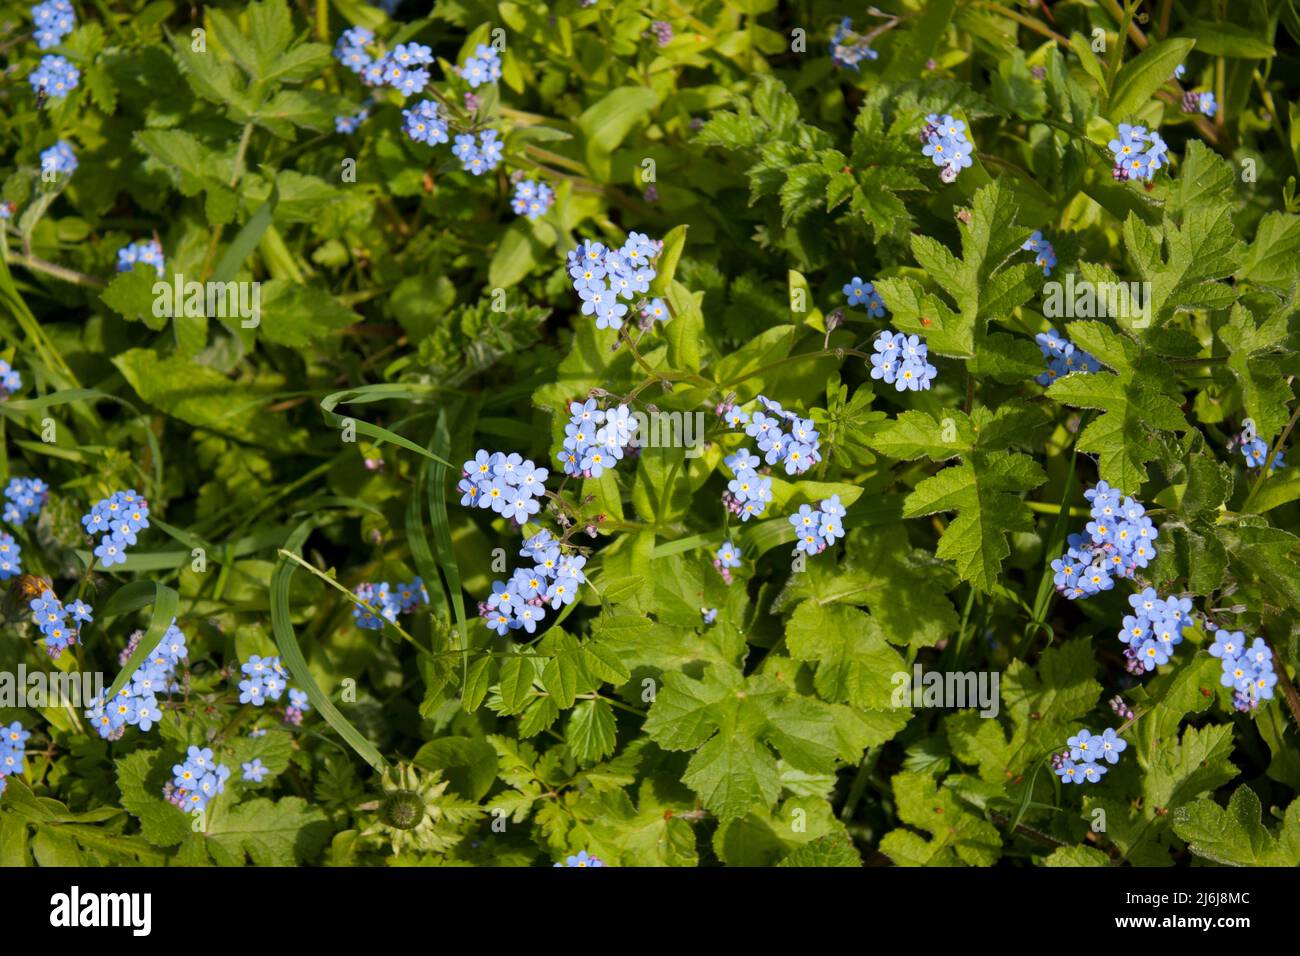 Forget-me-not flowers Stock Photo